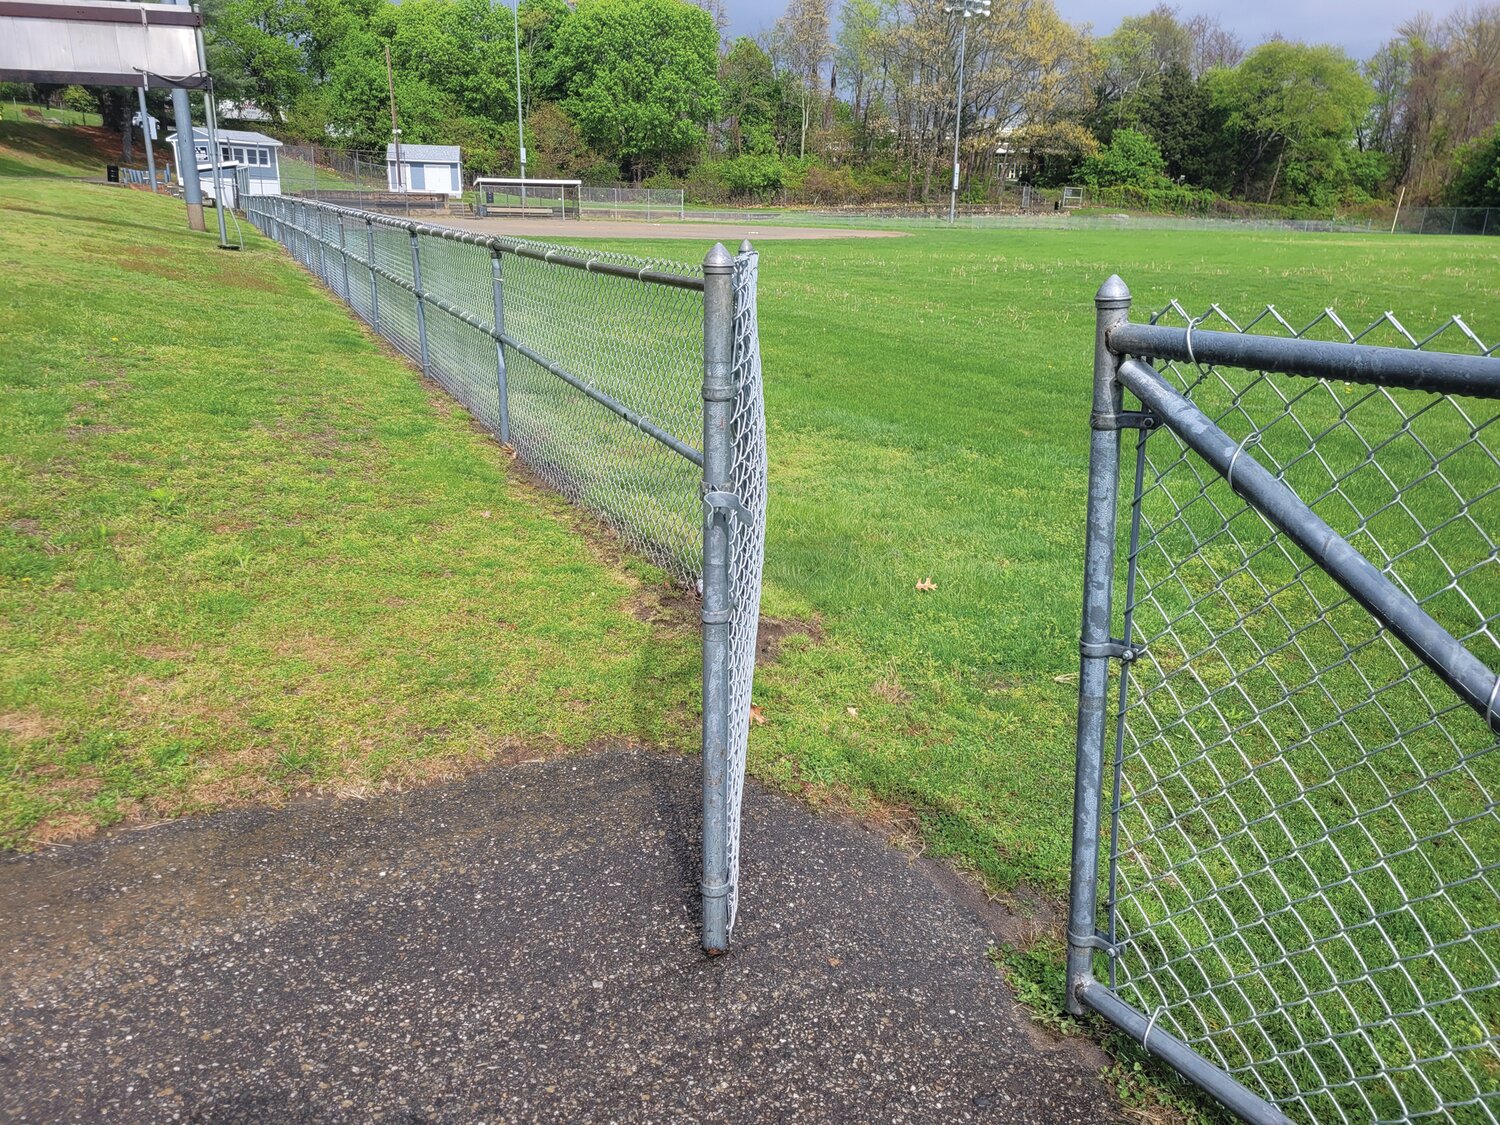 OPEN FOR PLAY? Johnston has been locking most of the town’s ballfields. One town councilman would like to see that policy change. The town’s director of buildings and grounds, however, says the locks keep out pooping dogs and their irresponsible owners. This War Memorial Park field was unlocked on Tuesday's rainy afternoon.